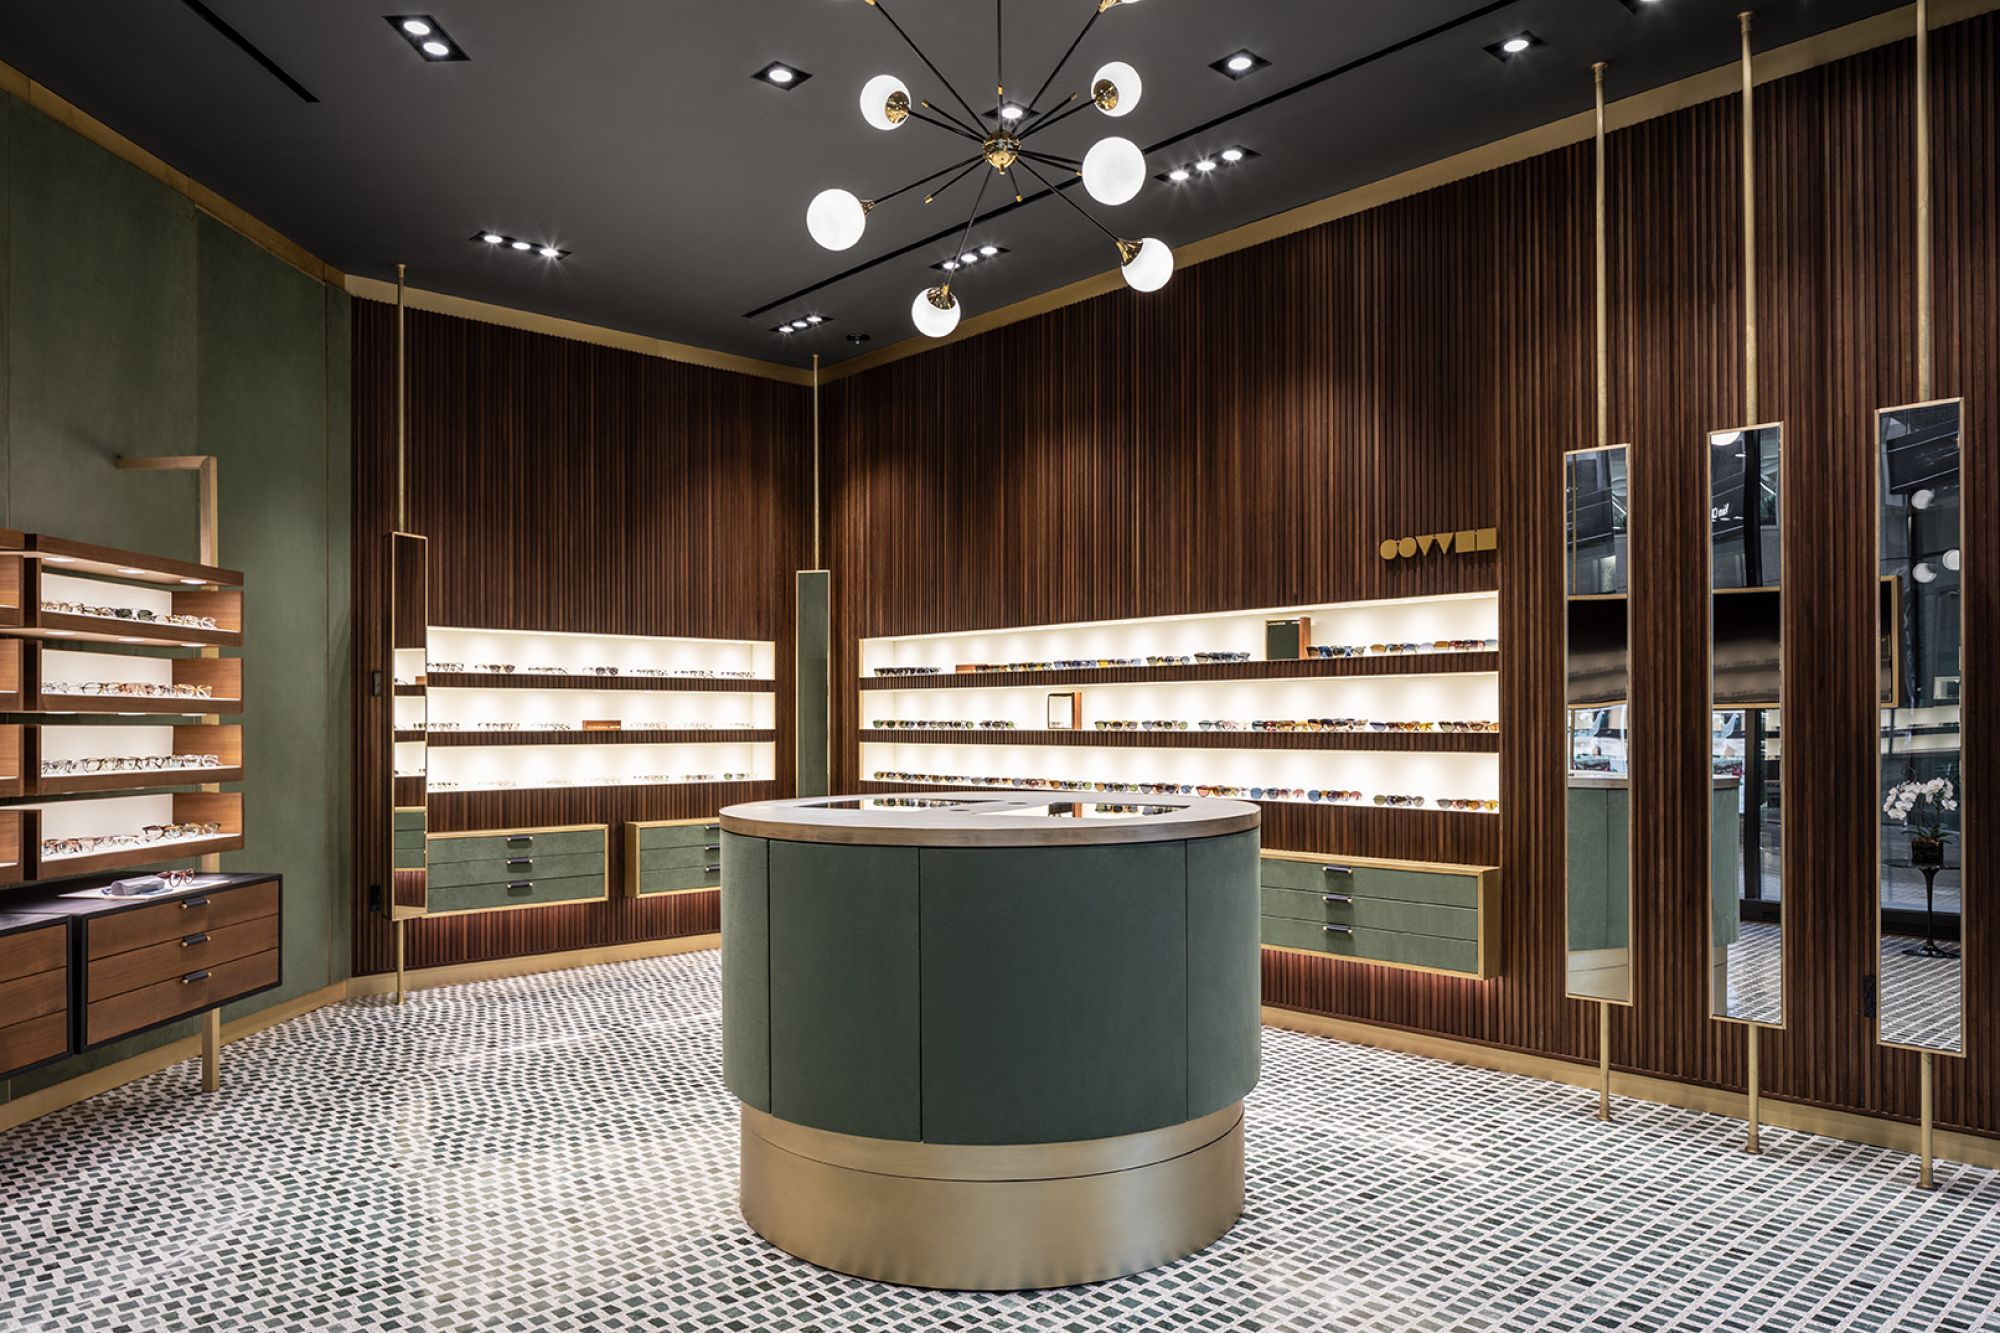 Oliver Peoples Vancouver